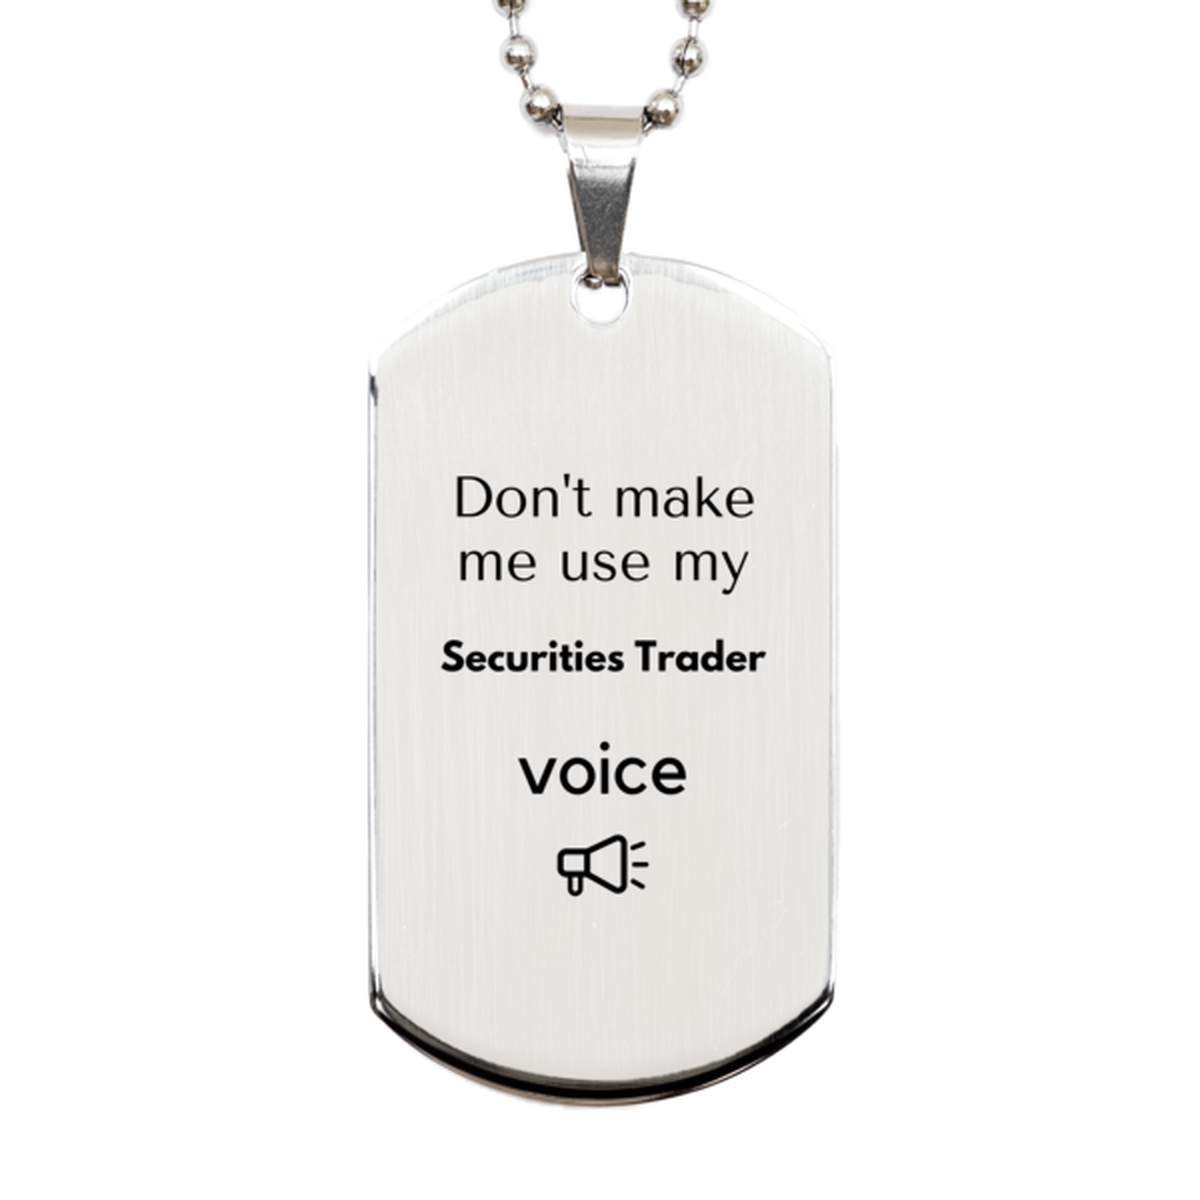 Don't make me use my Securities Trader voice, Sarcasm Securities Trader Gifts, Christmas Securities Trader Silver Dog Tag Birthday Unique Gifts For Securities Trader Coworkers, Men, Women, Colleague, Friends